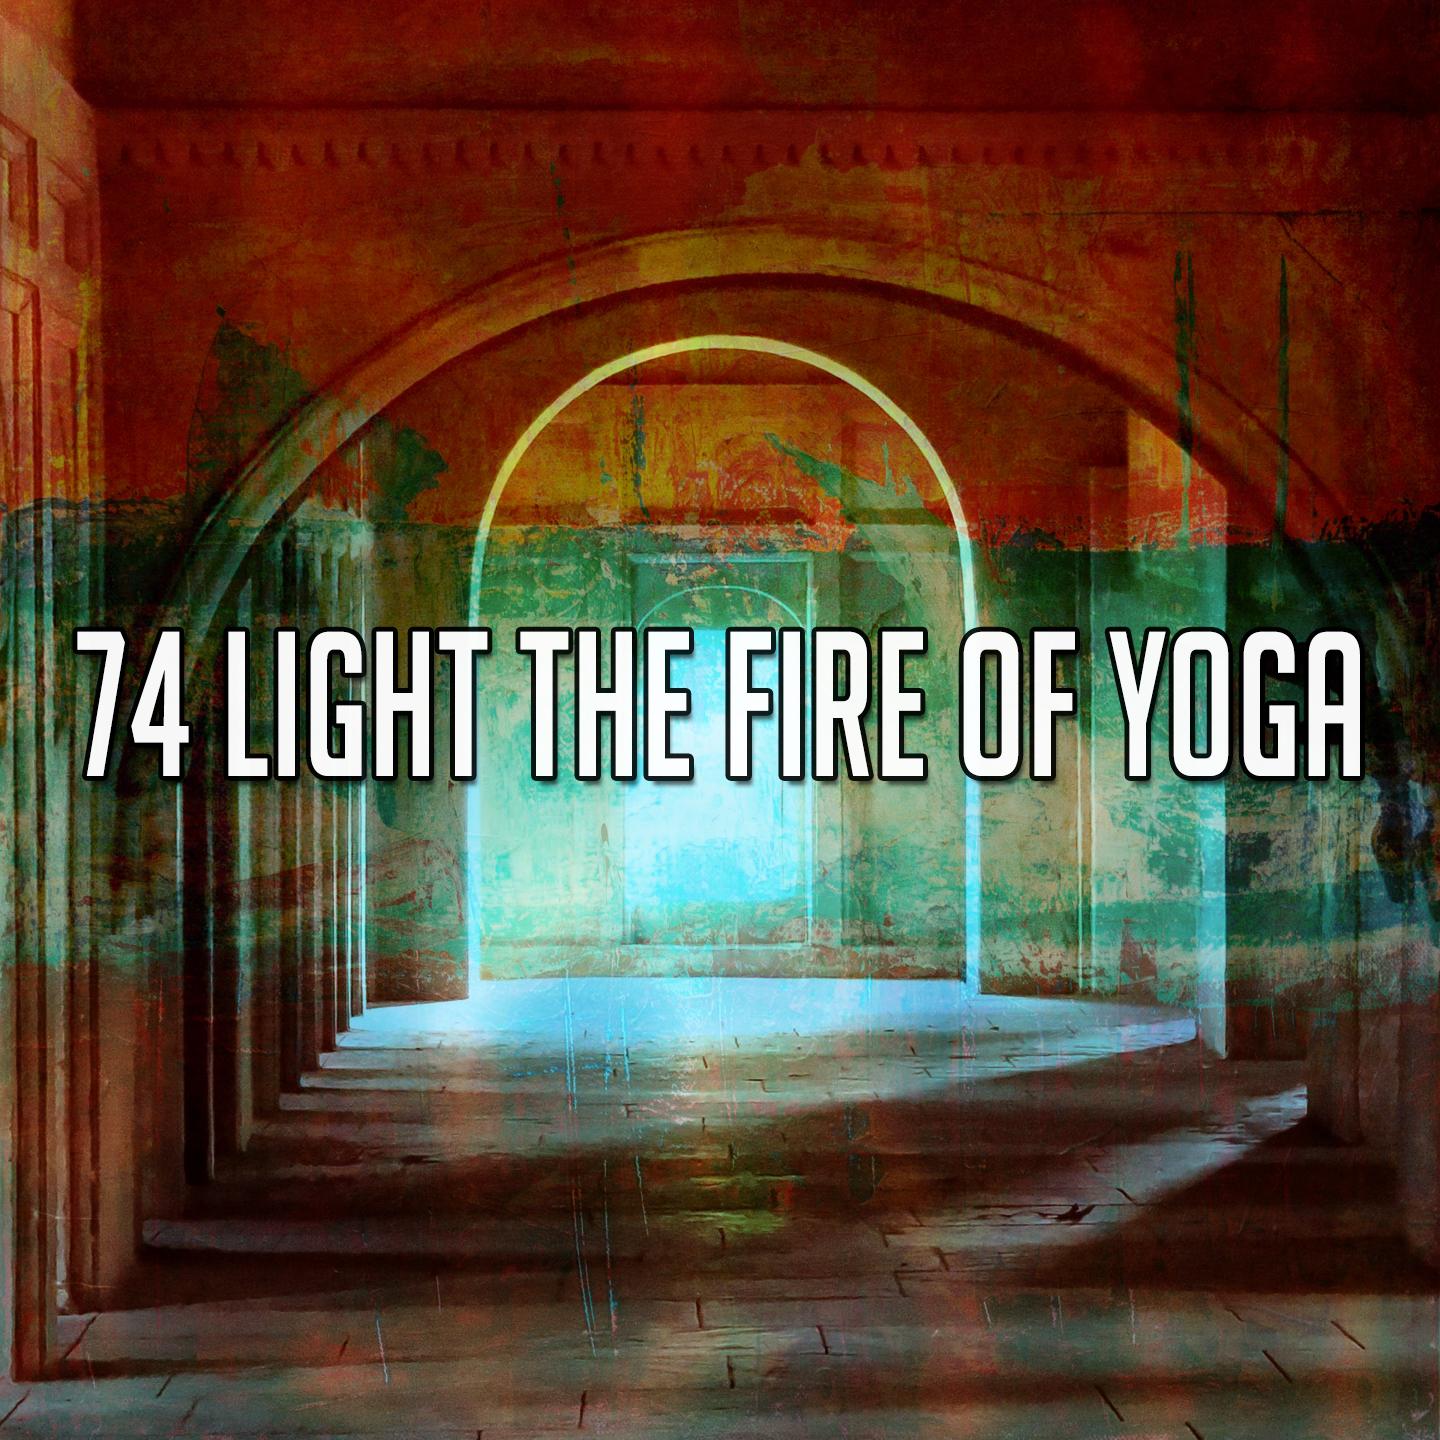 74 Light the Fire of Yoga